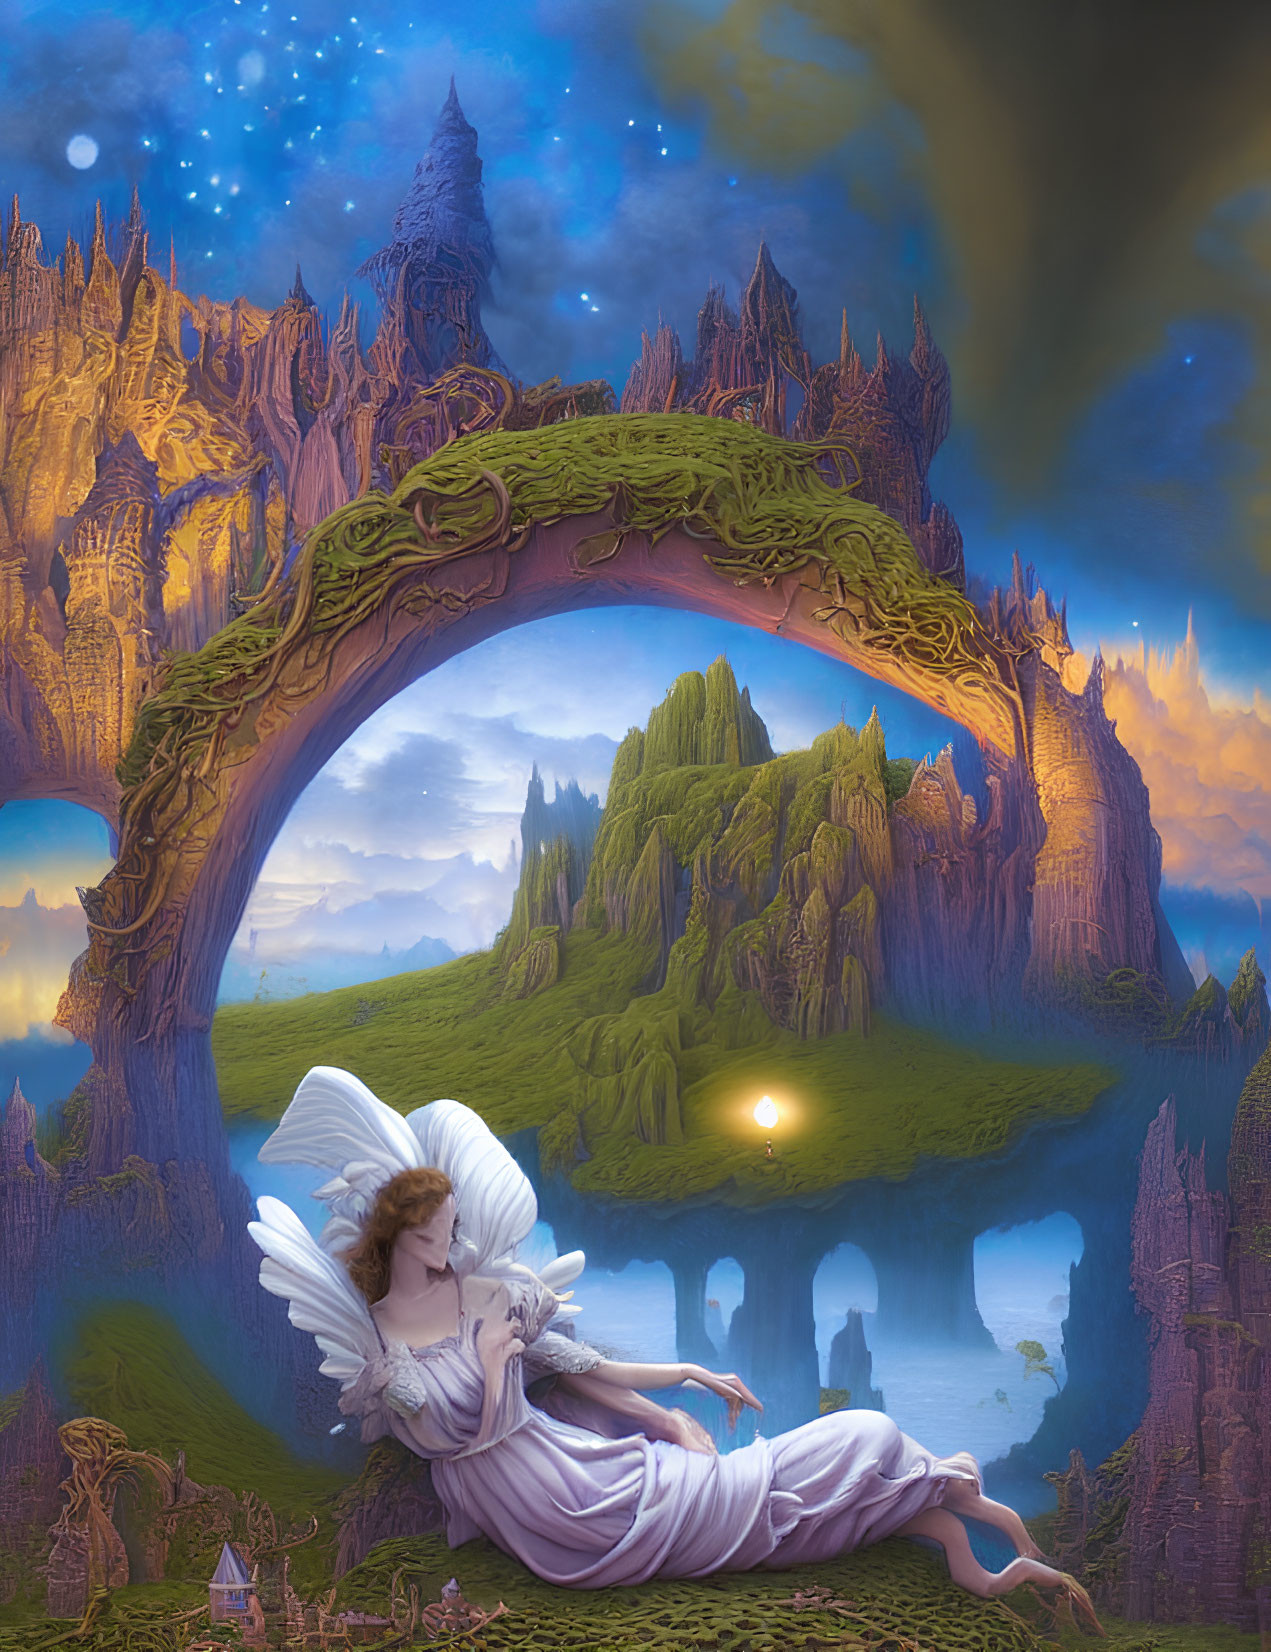 Fantastical angelic figure under arch with mystical castle and ethereal landscapes